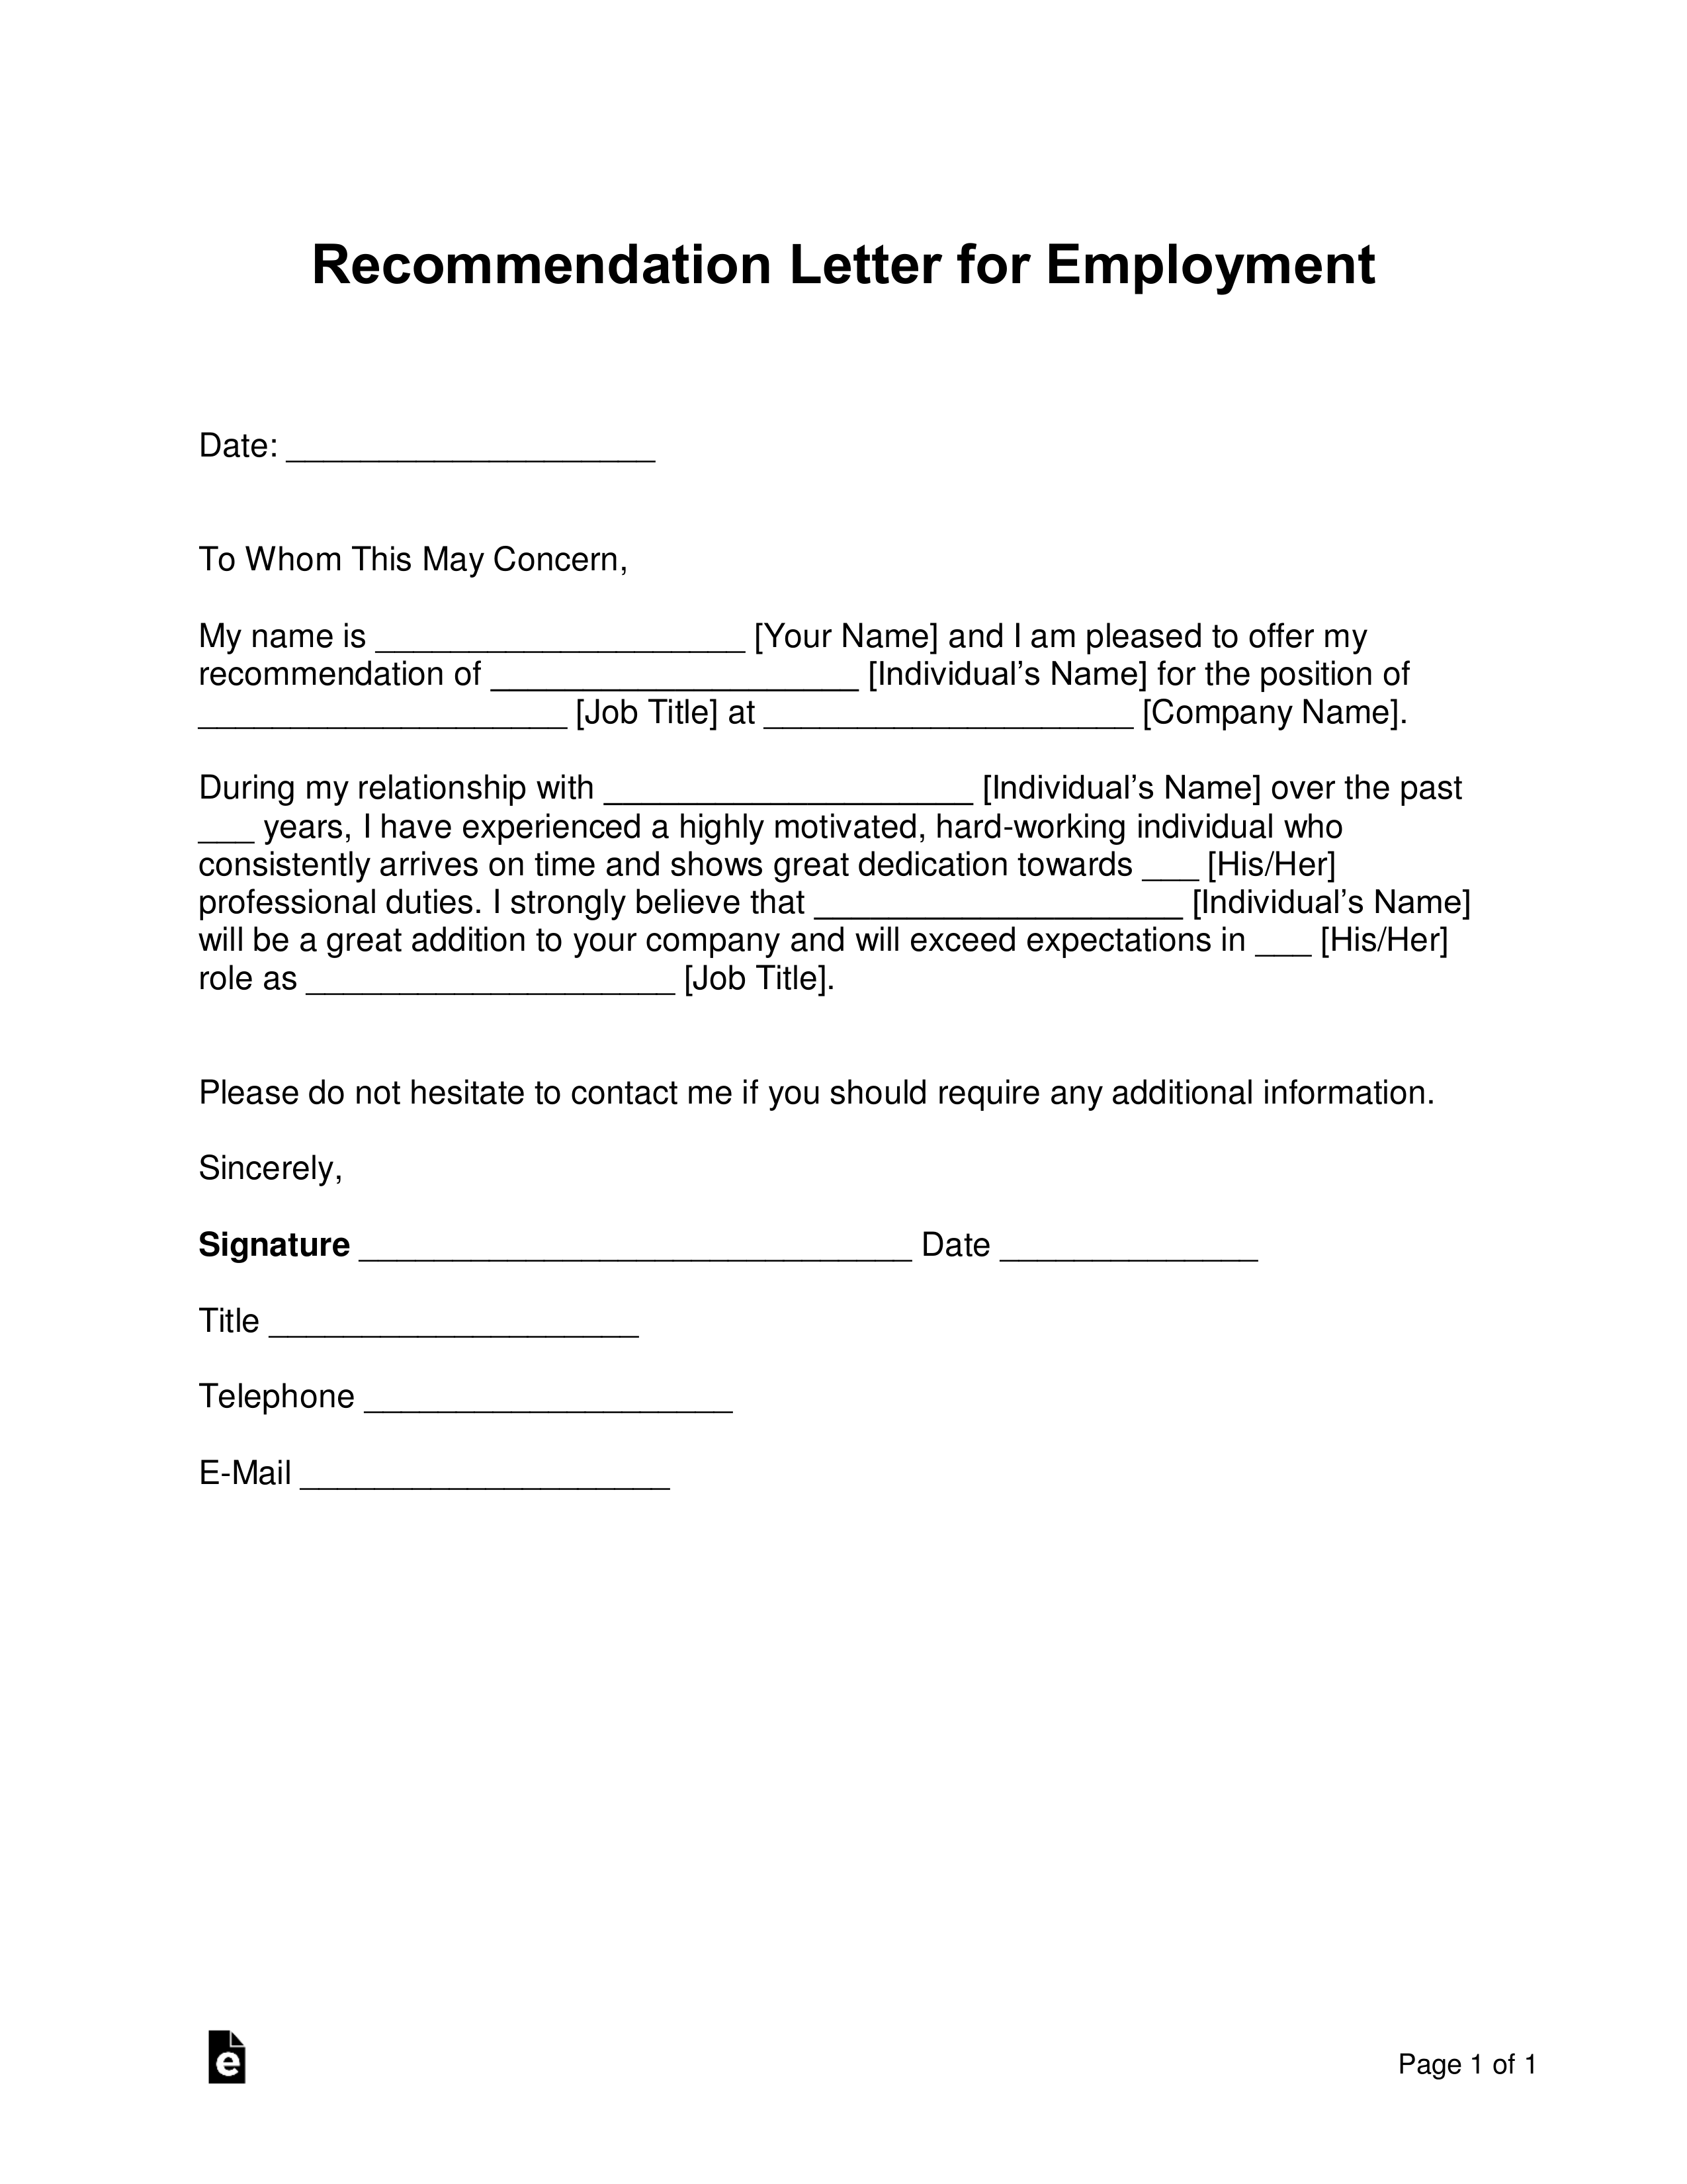 Help Me Write A Letter Of Recommendation